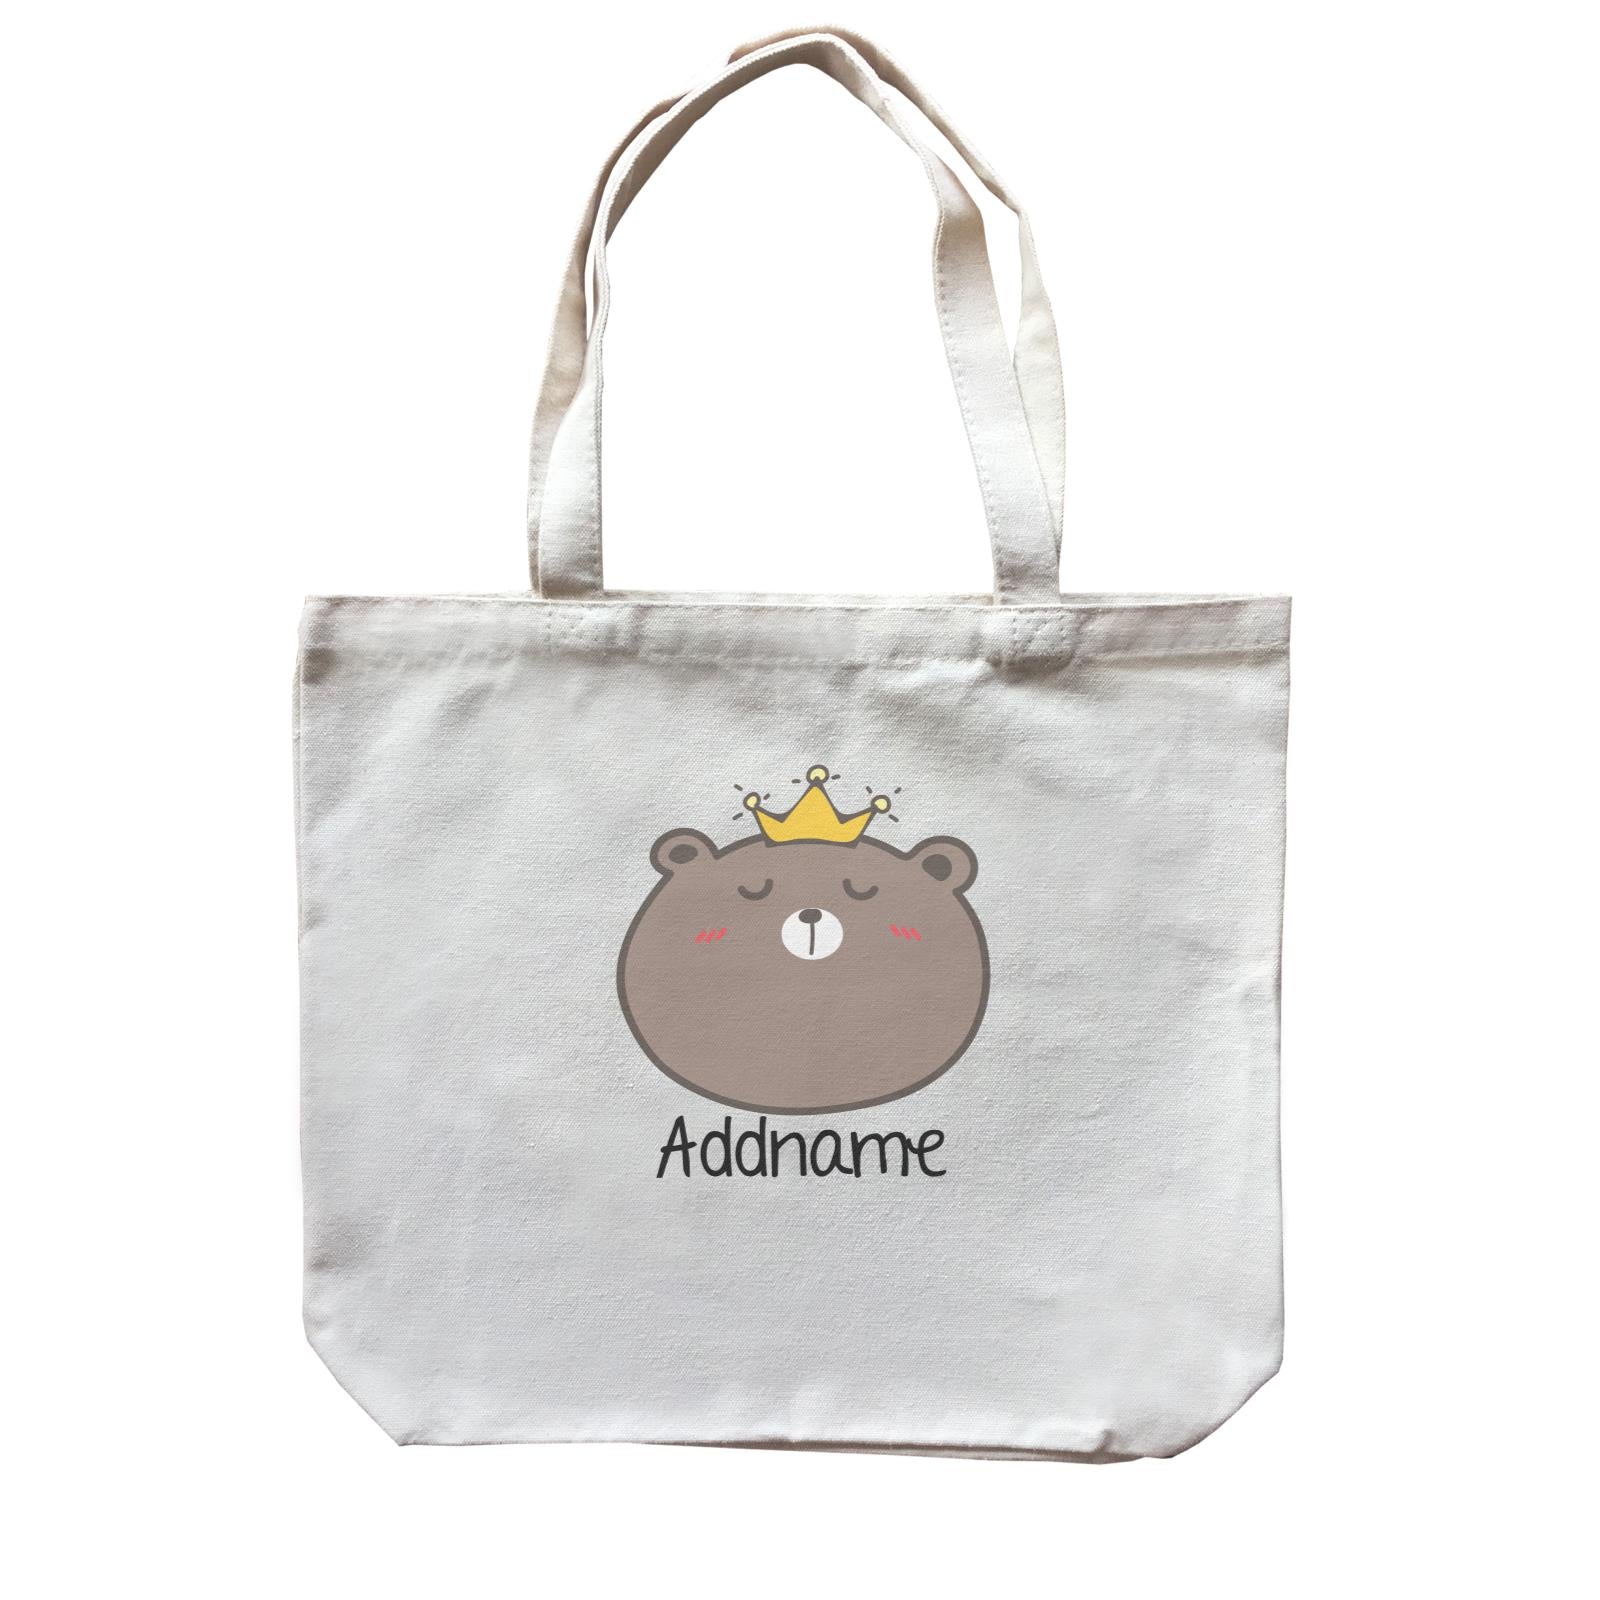 Cute Animals And Friends Series Cute Brown Bear With Crown Addname Canvas Bag